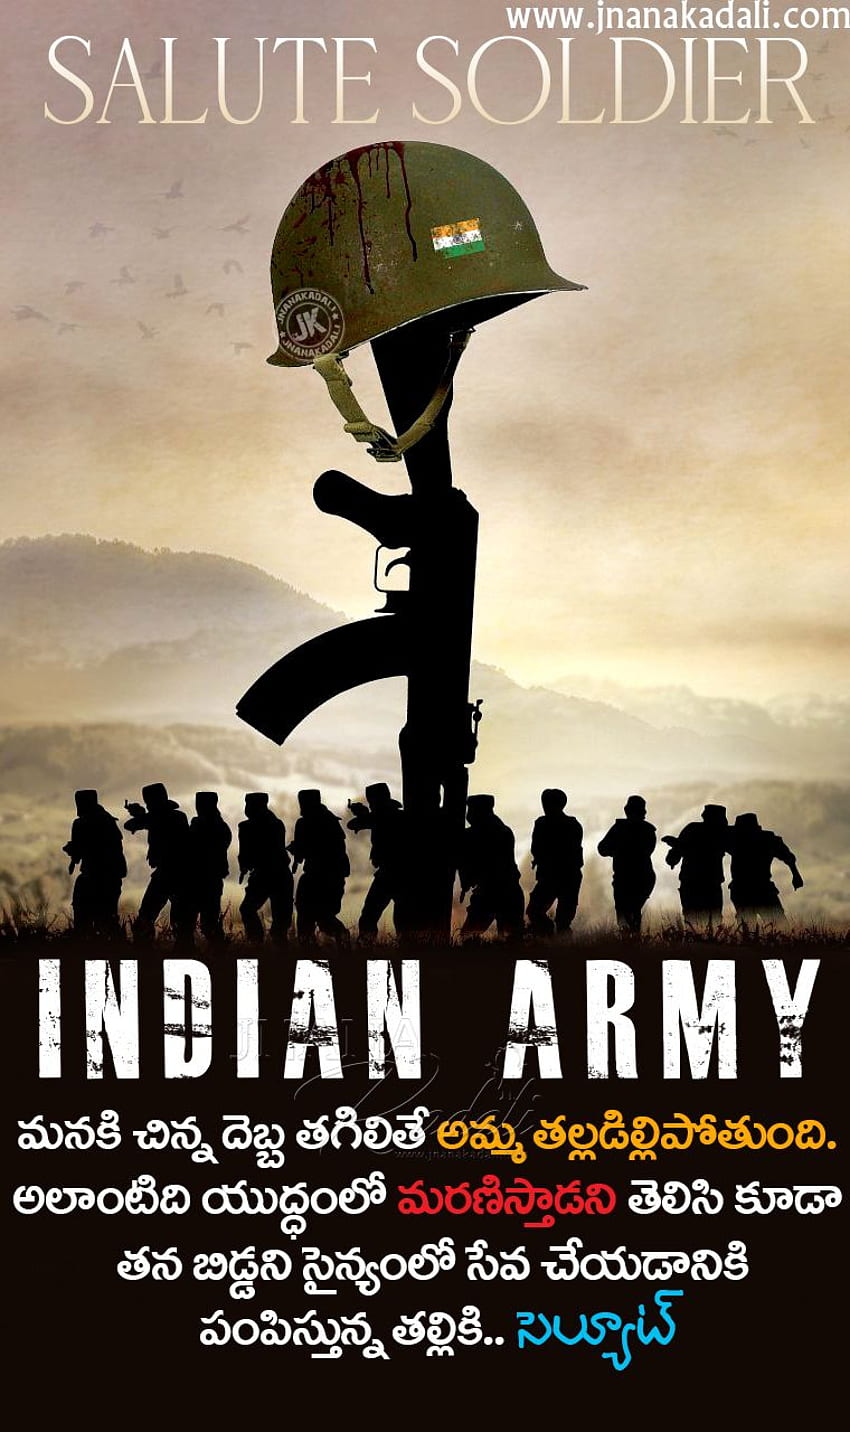 Patriotic Quotes About Indian Army In Telugu Greatness Of Indian Mother In Telugu. JNANA. Telugu Quotes. English Quotes. Hindi Quotes. Tamil Quotes. Dharmasandehalu, Soldier Quotes HD phone wallpaper